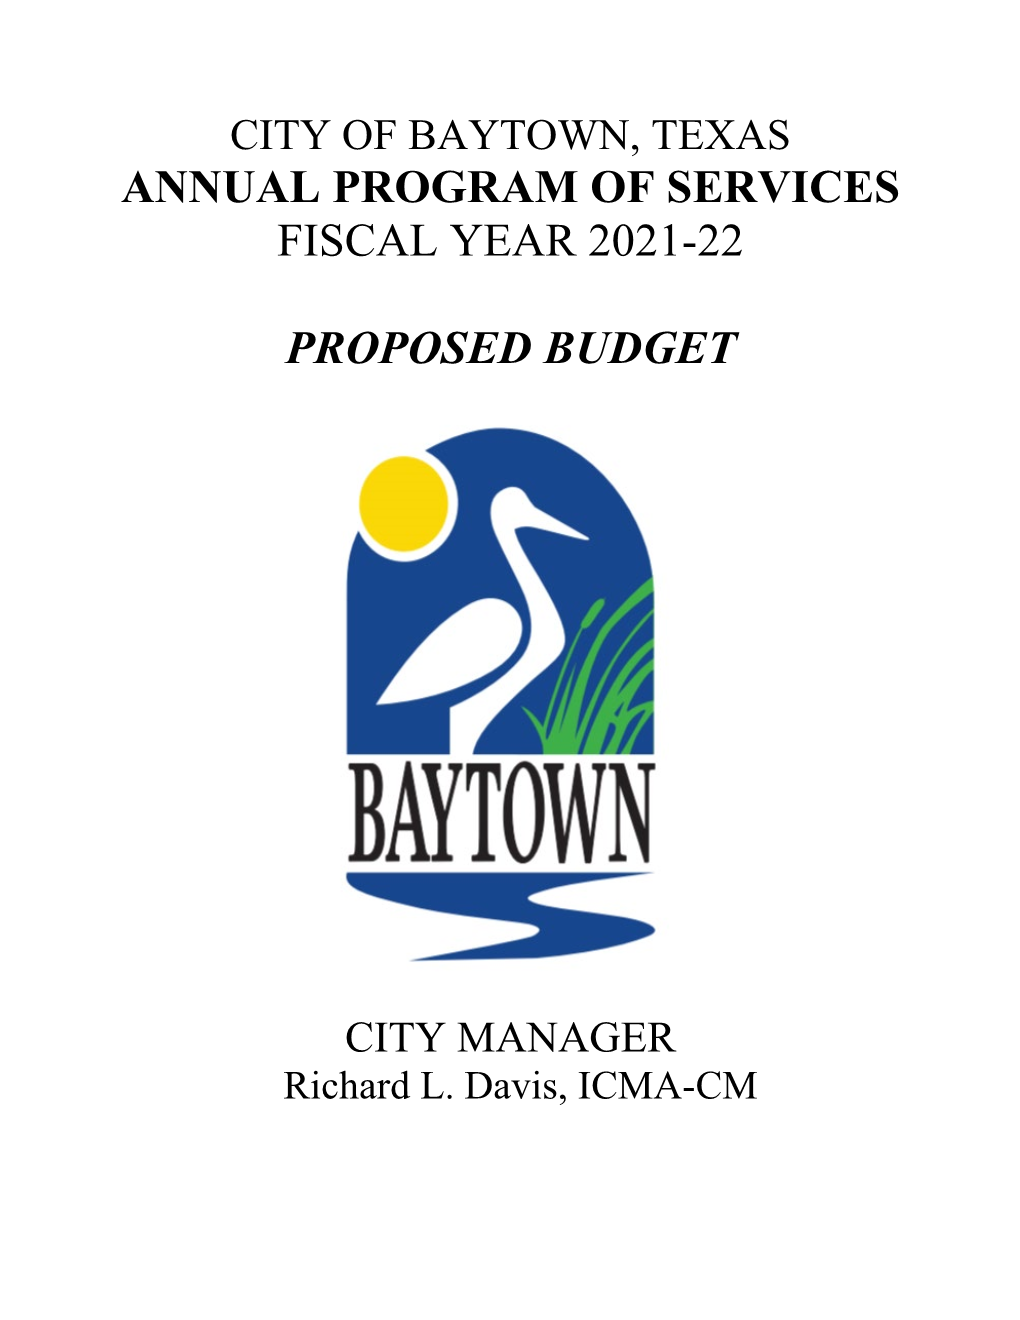 Annual Program of Services Fiscal Year 2021-22